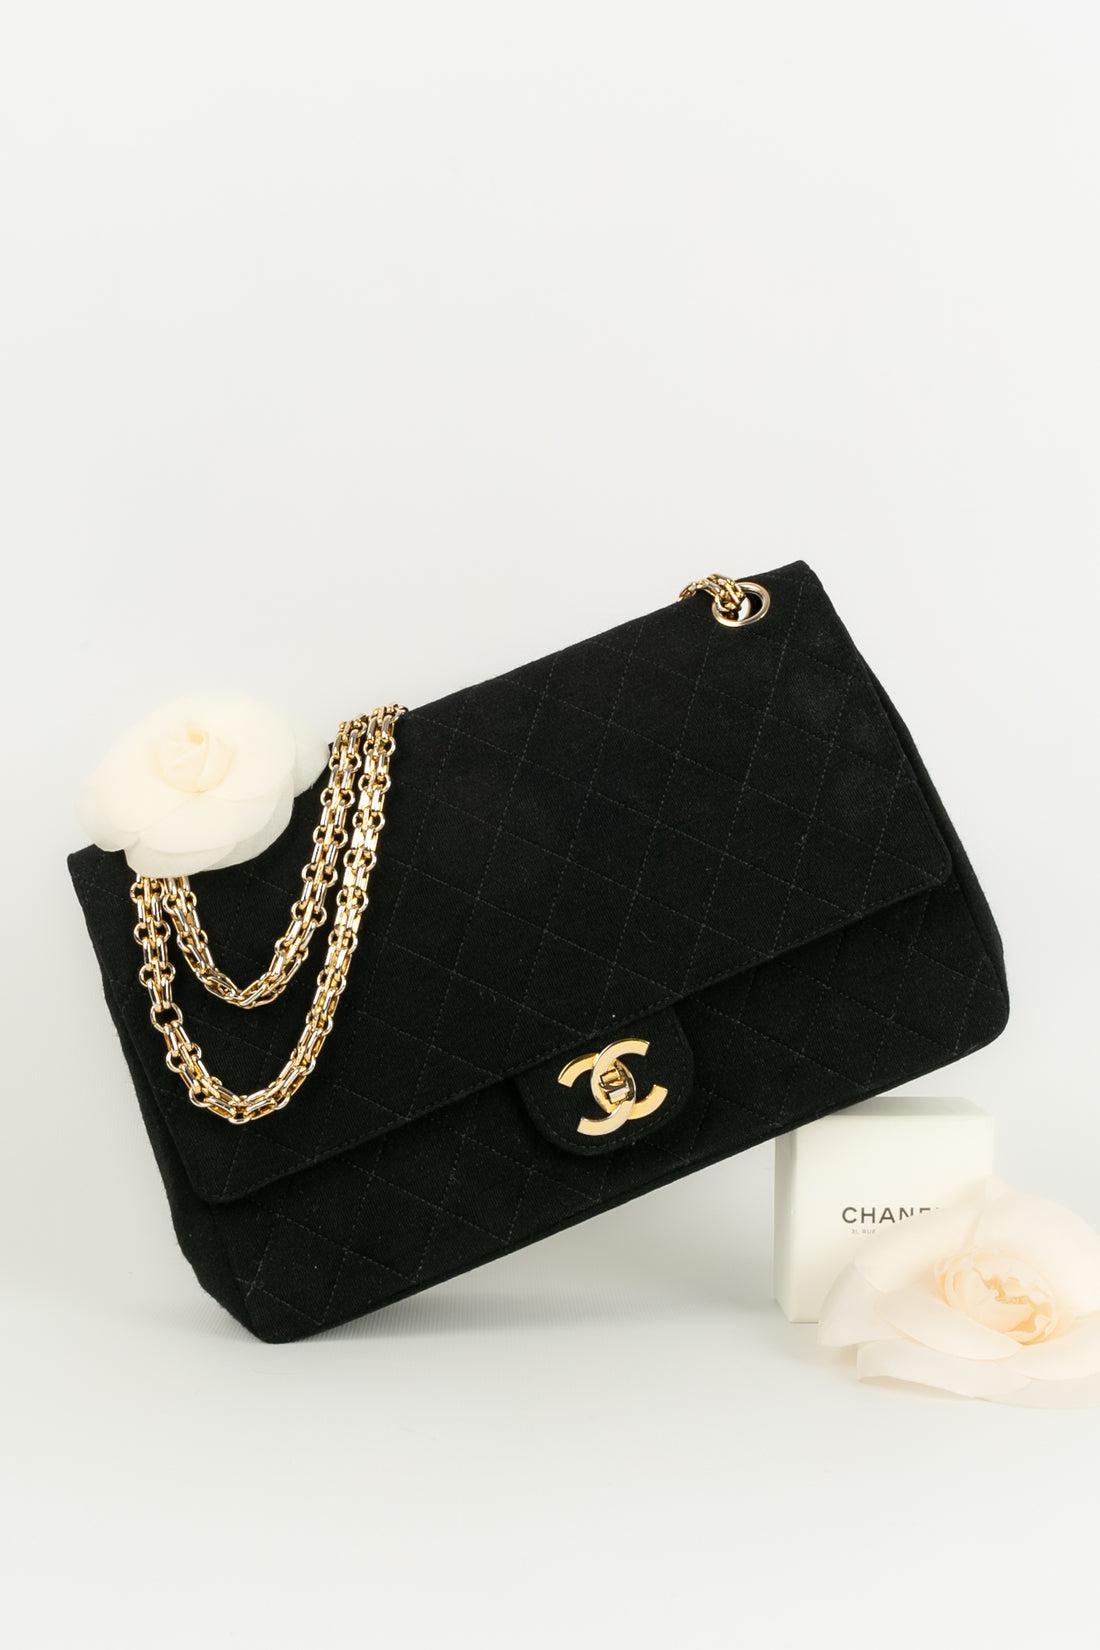 Chanel Black Quilted Jersey Bag For Sale 12